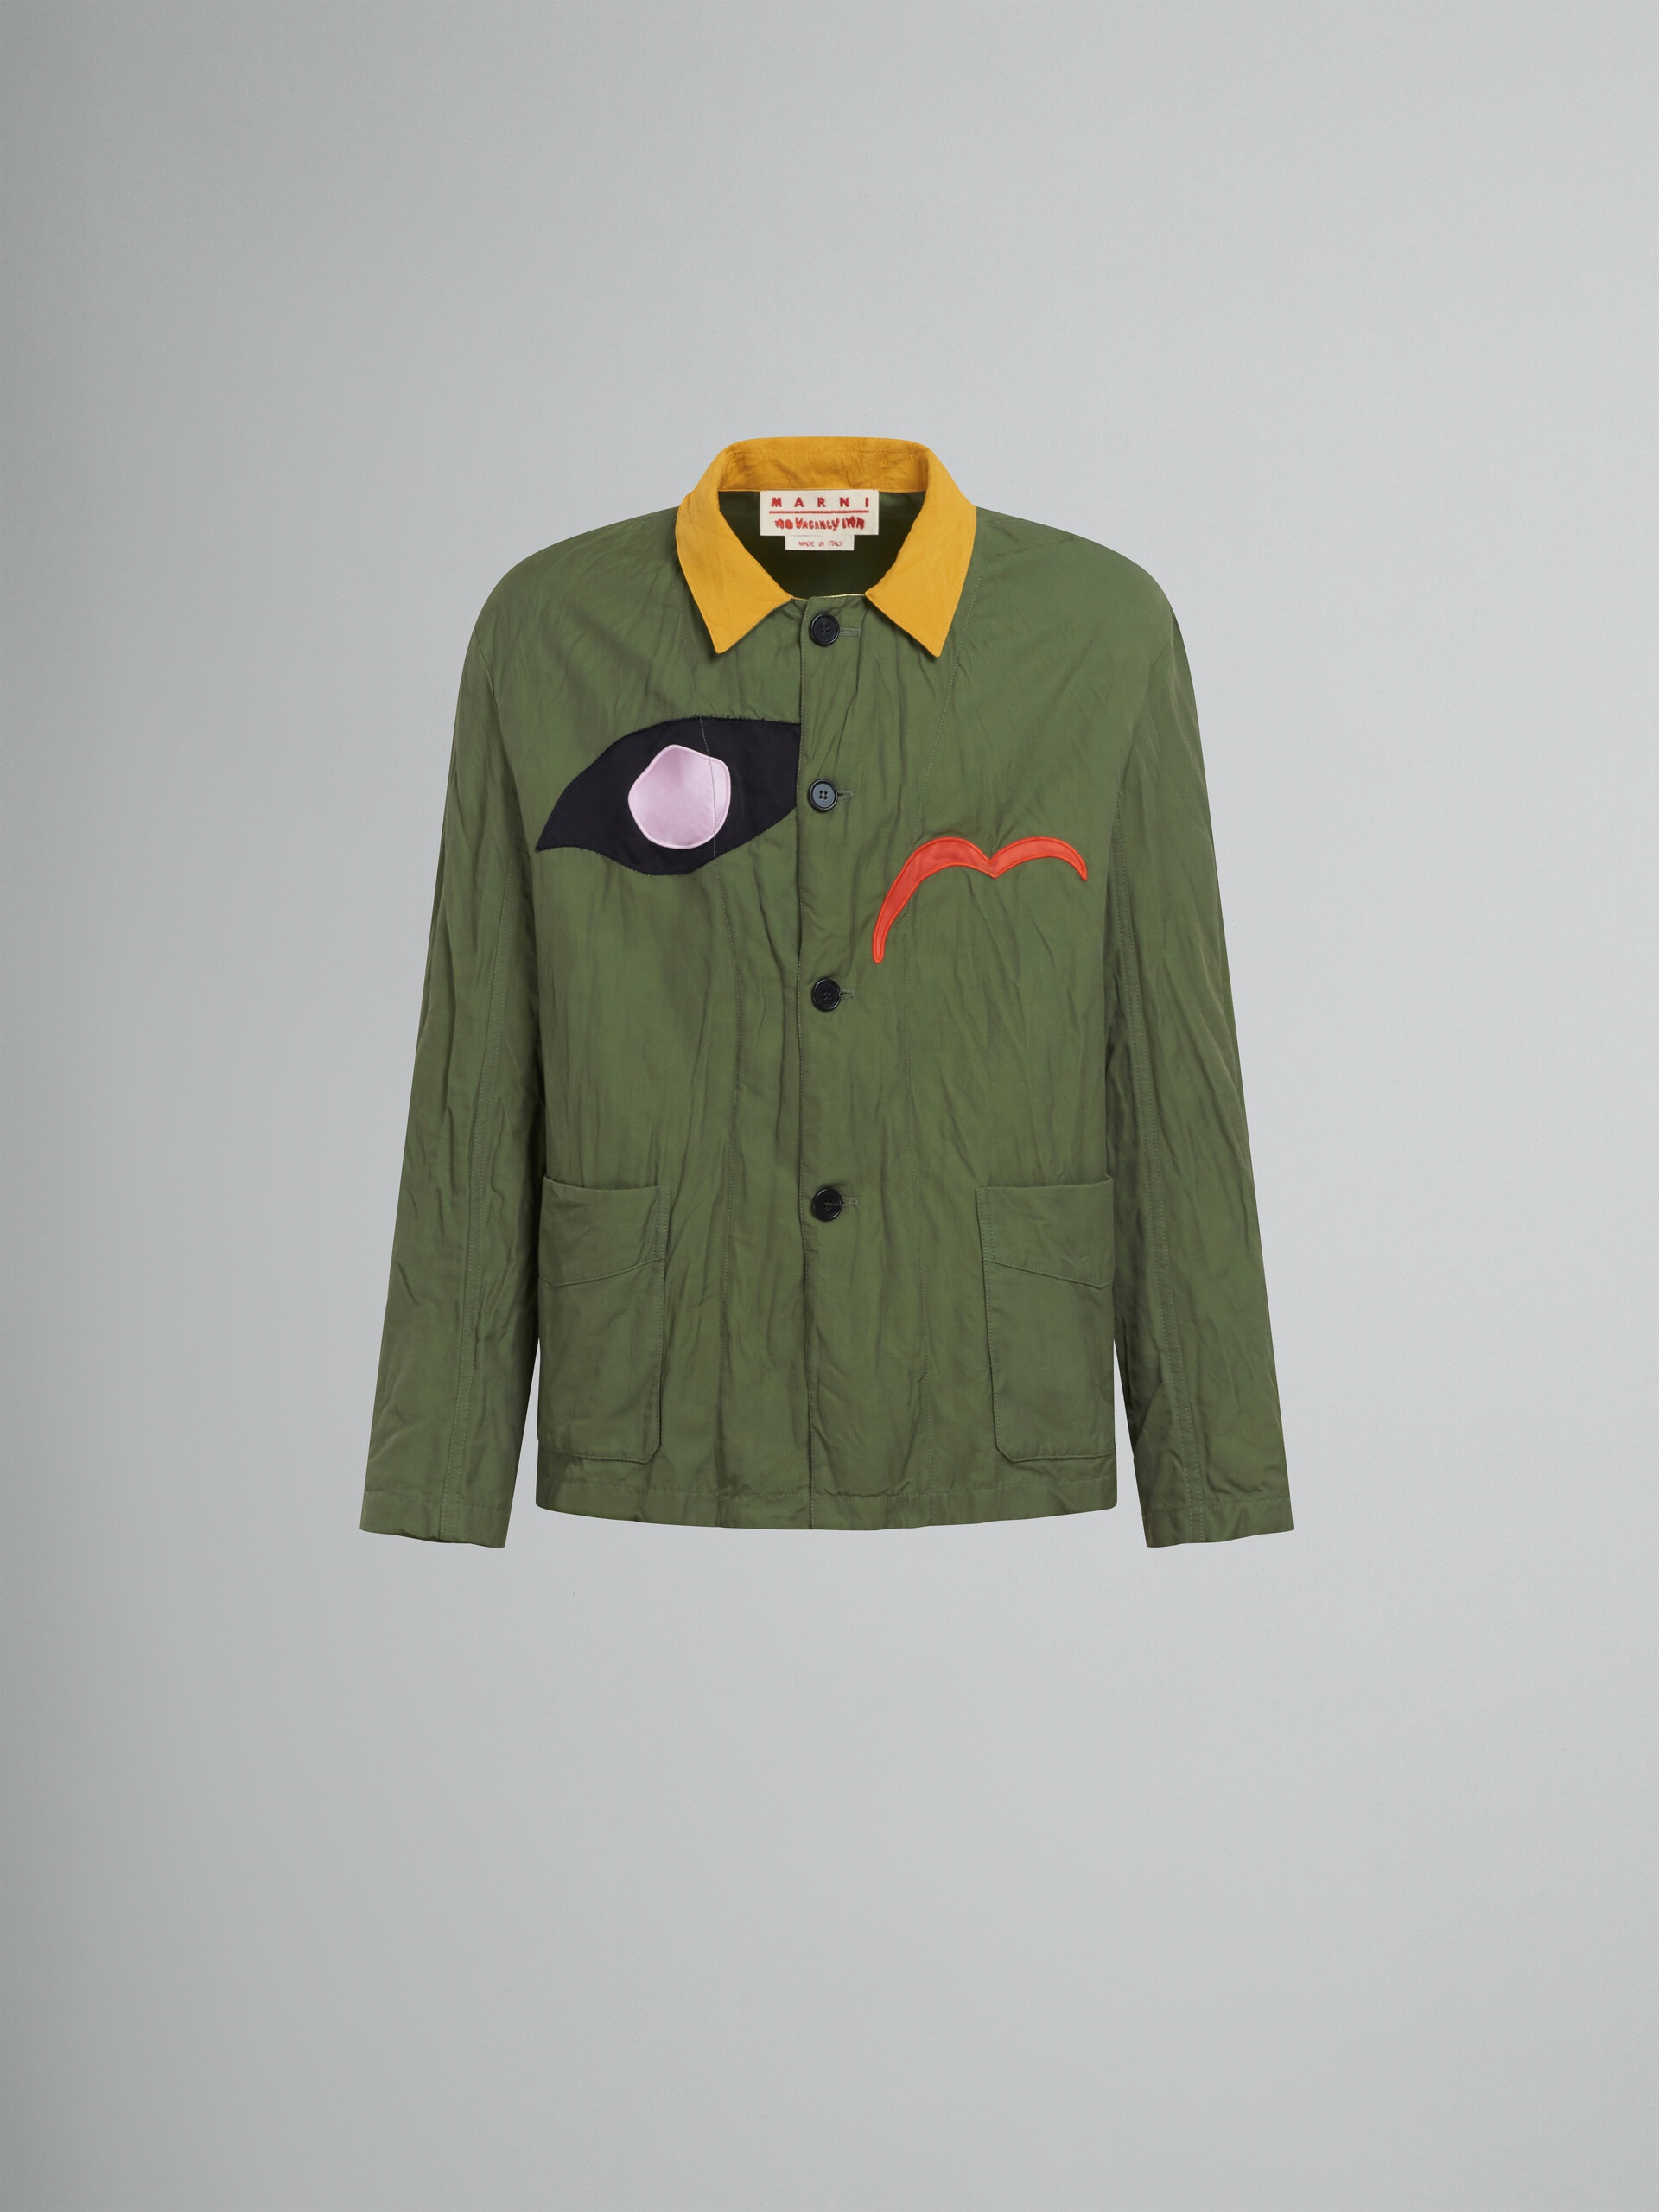 MARNI X NO VACANCY INN - GREEN GABARDINE JACKET WITH EMBROIDERED PATCHES - 1